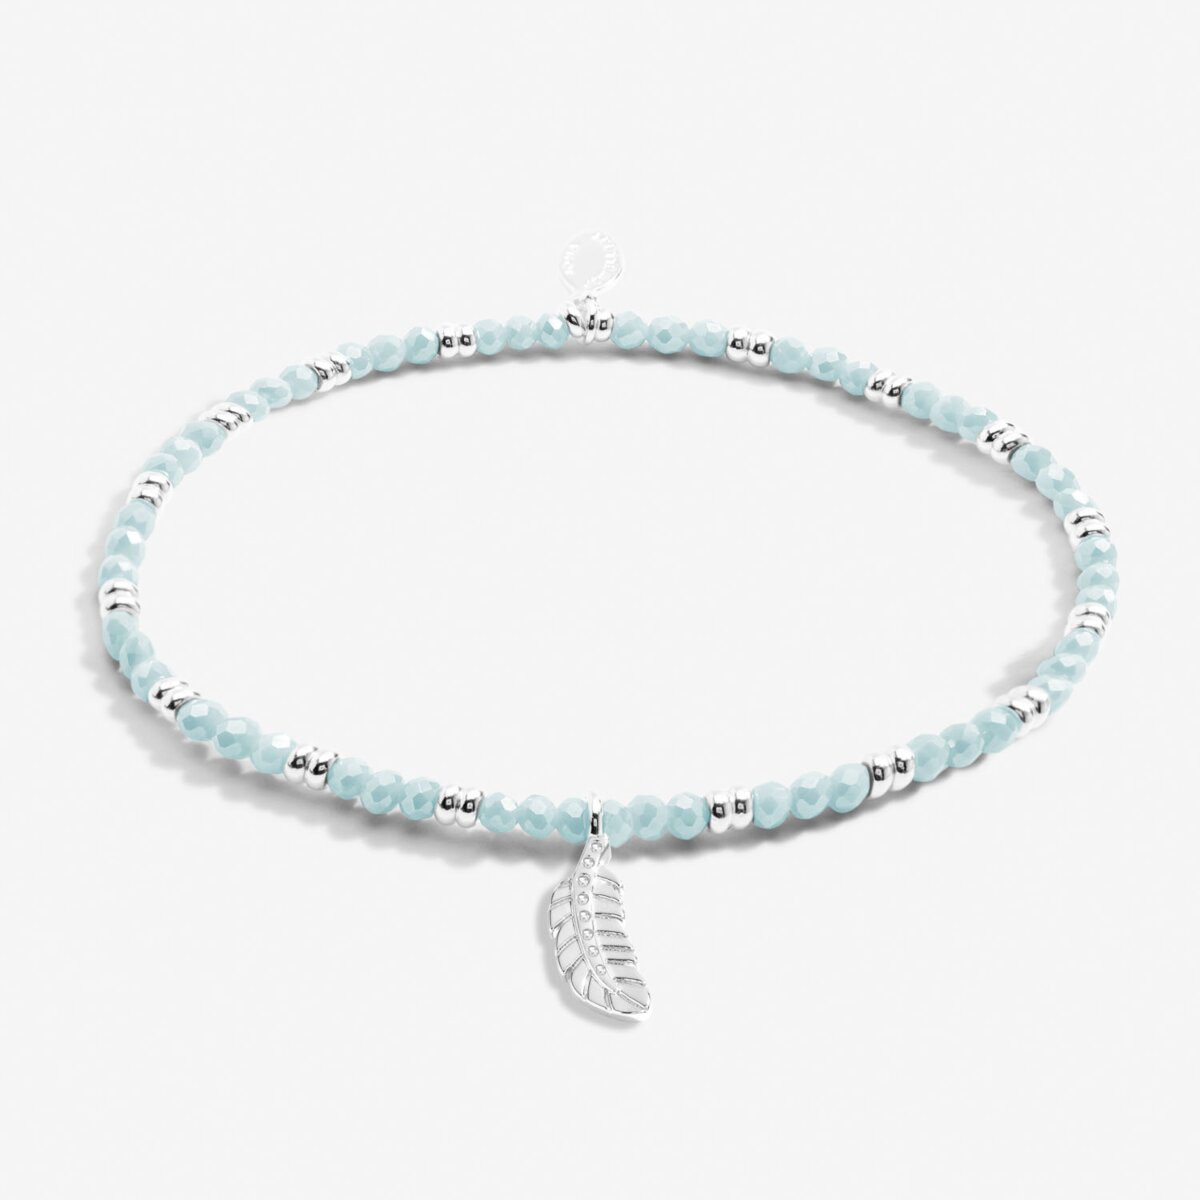 Joma Boho Beads Feather Bracelet in Blue and Silver